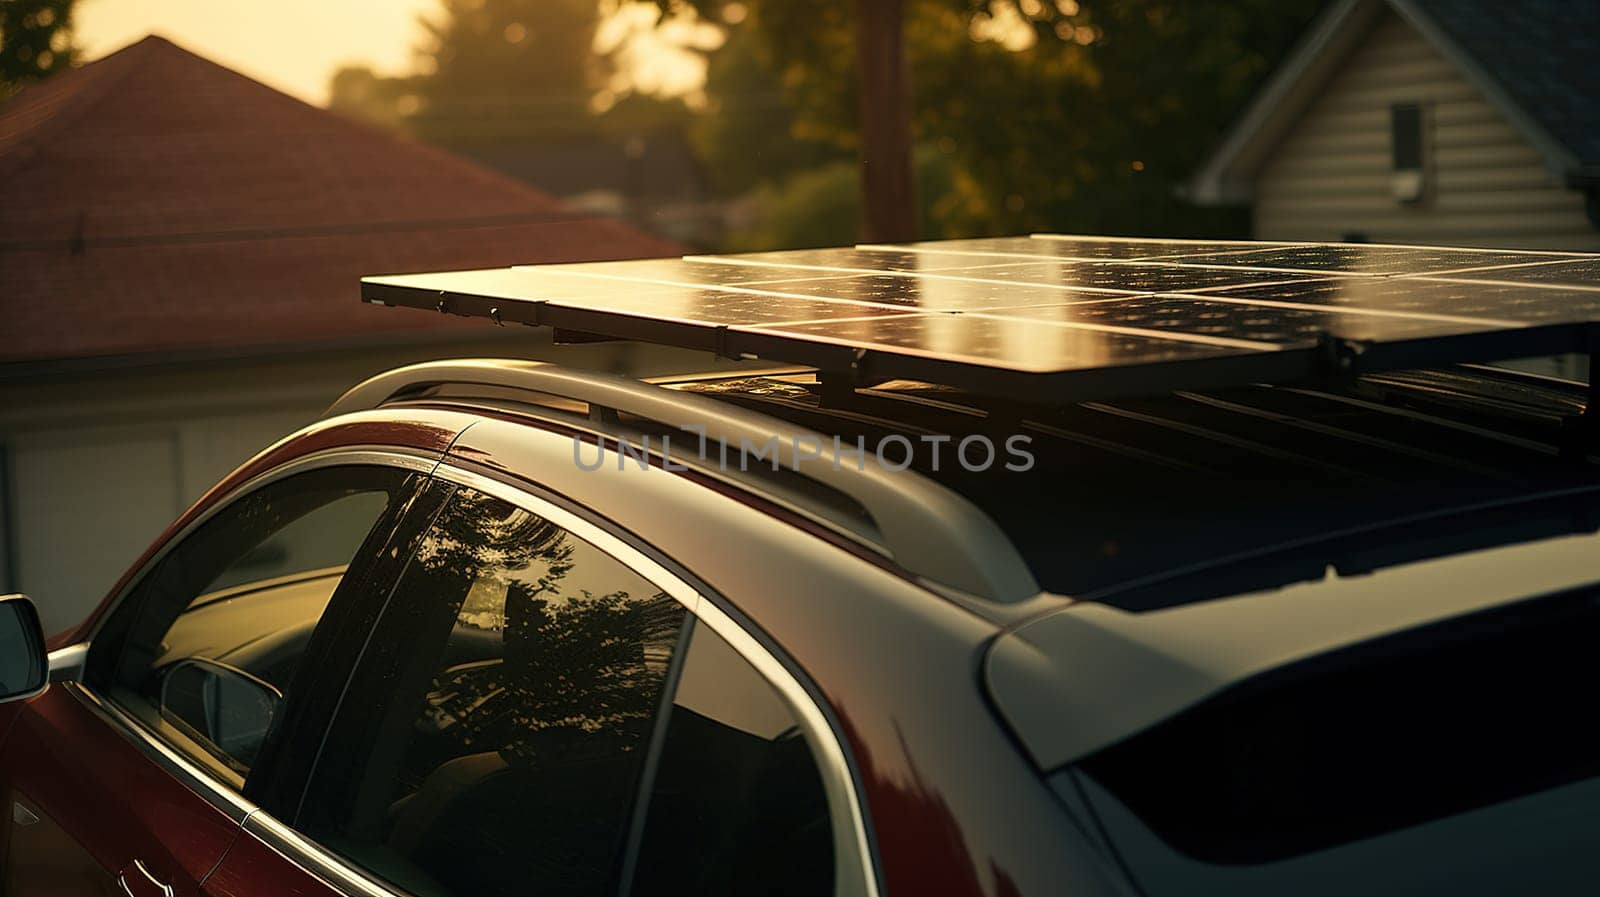 car with solar panels on the roof, use of modern technologies in everyday life, environmentally friendly method of energy production, high quality photo